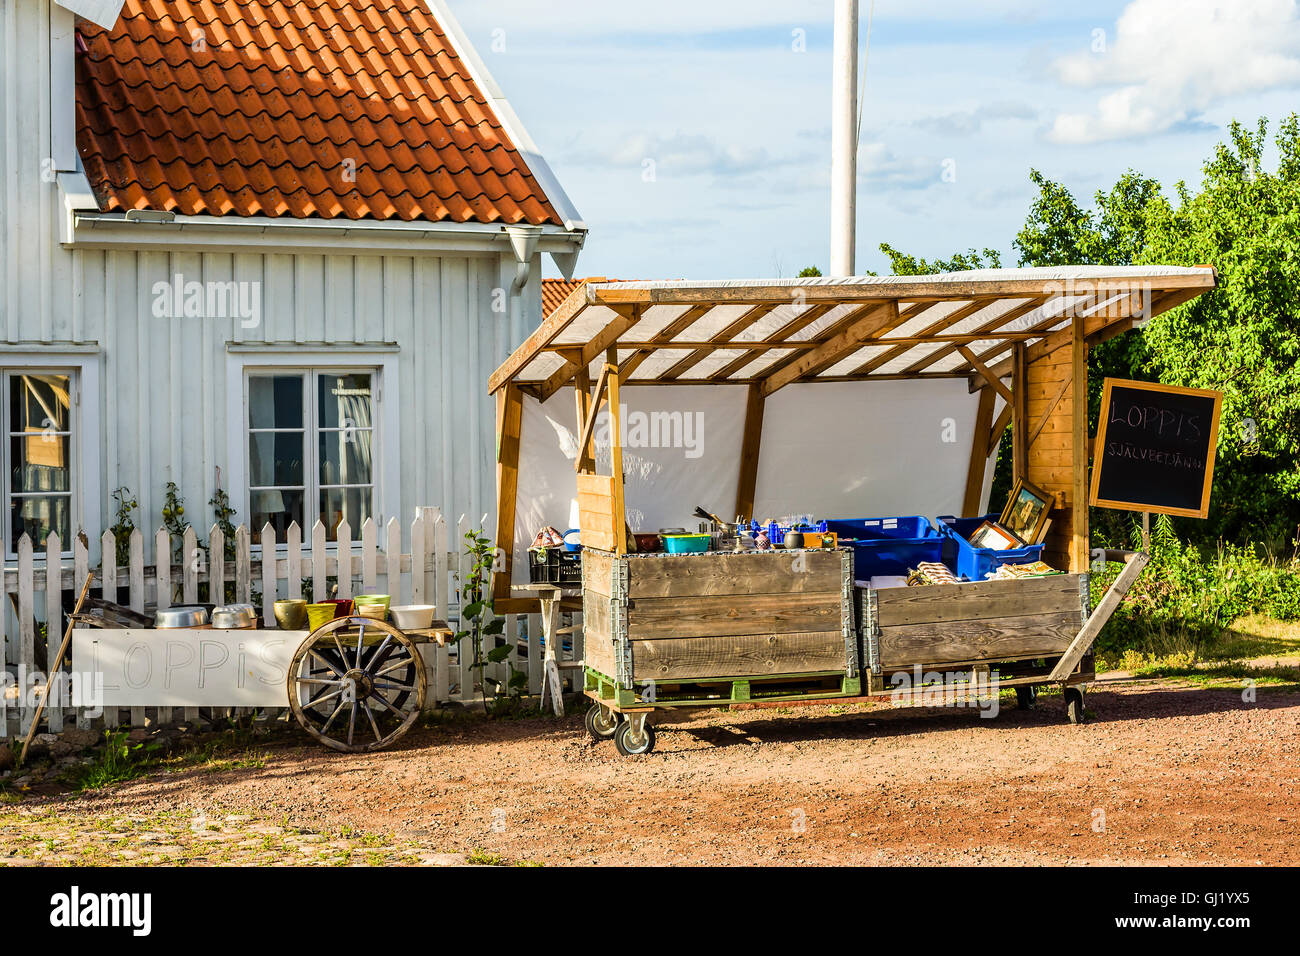 Pataholm, Sweden - August 9, 2016: Unmanned flea market (Loppis) stand with some old stuff. Payment is done by customer by use o Stock Photo